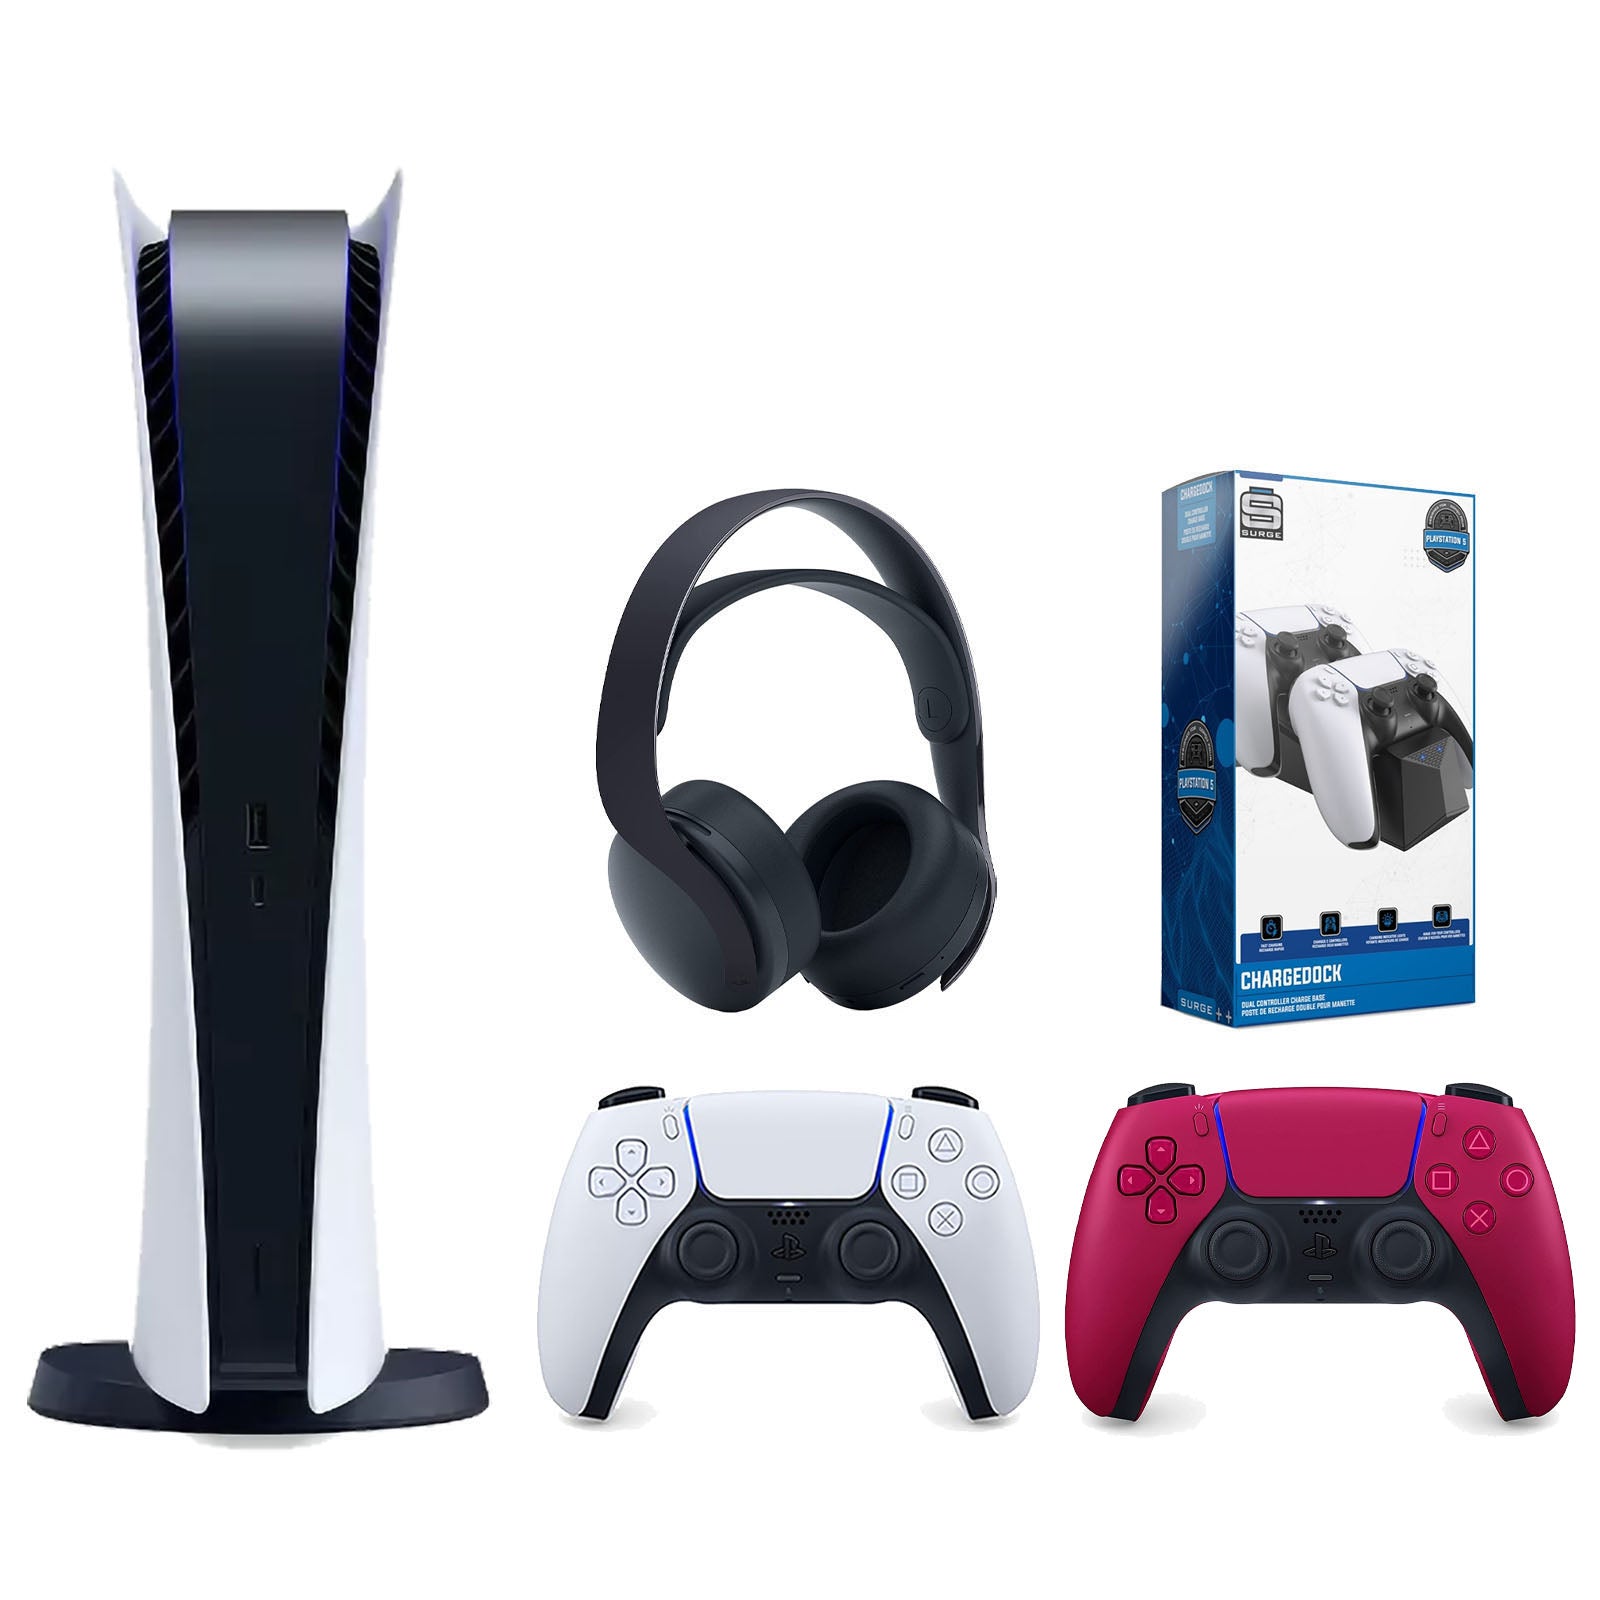 Sony Playstation 5 Digital Edition Console with Extra Red Controller, Black PULSE 3D Headset and Surge Dual Controller Charge Dock Bundle - Pro-Distributing